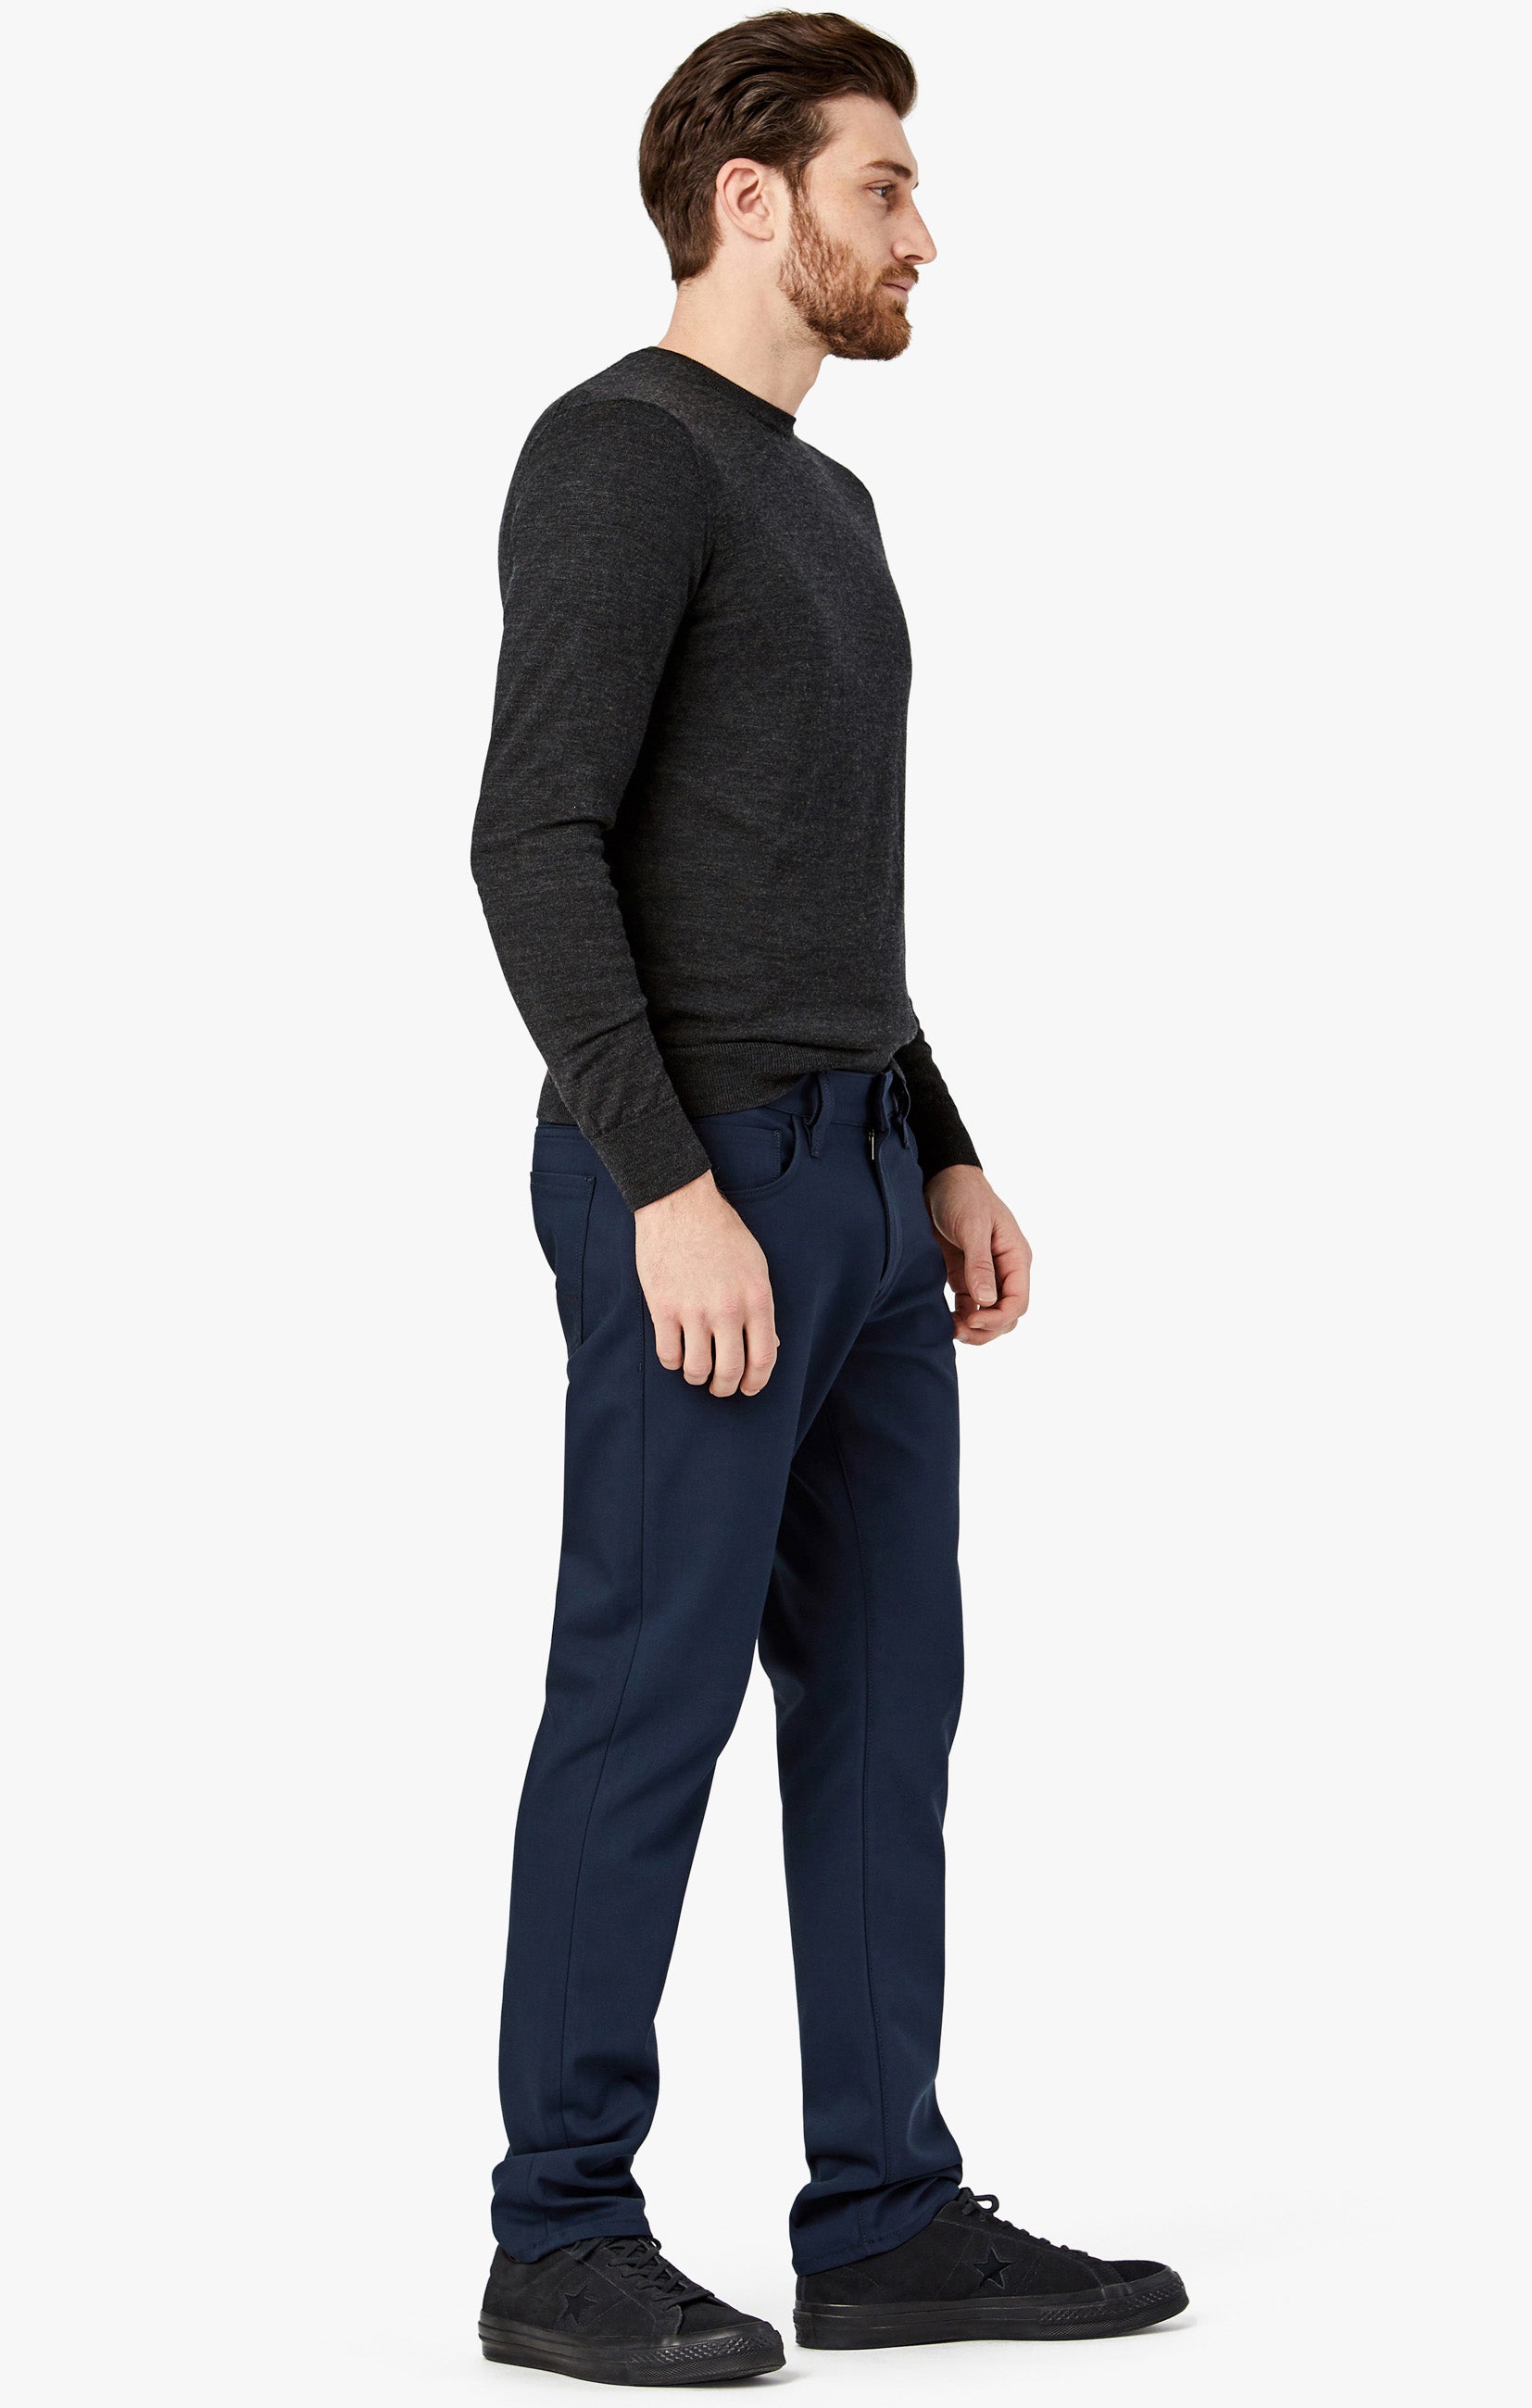 Courage Straight Leg Pants in Navy Commuter Image 3